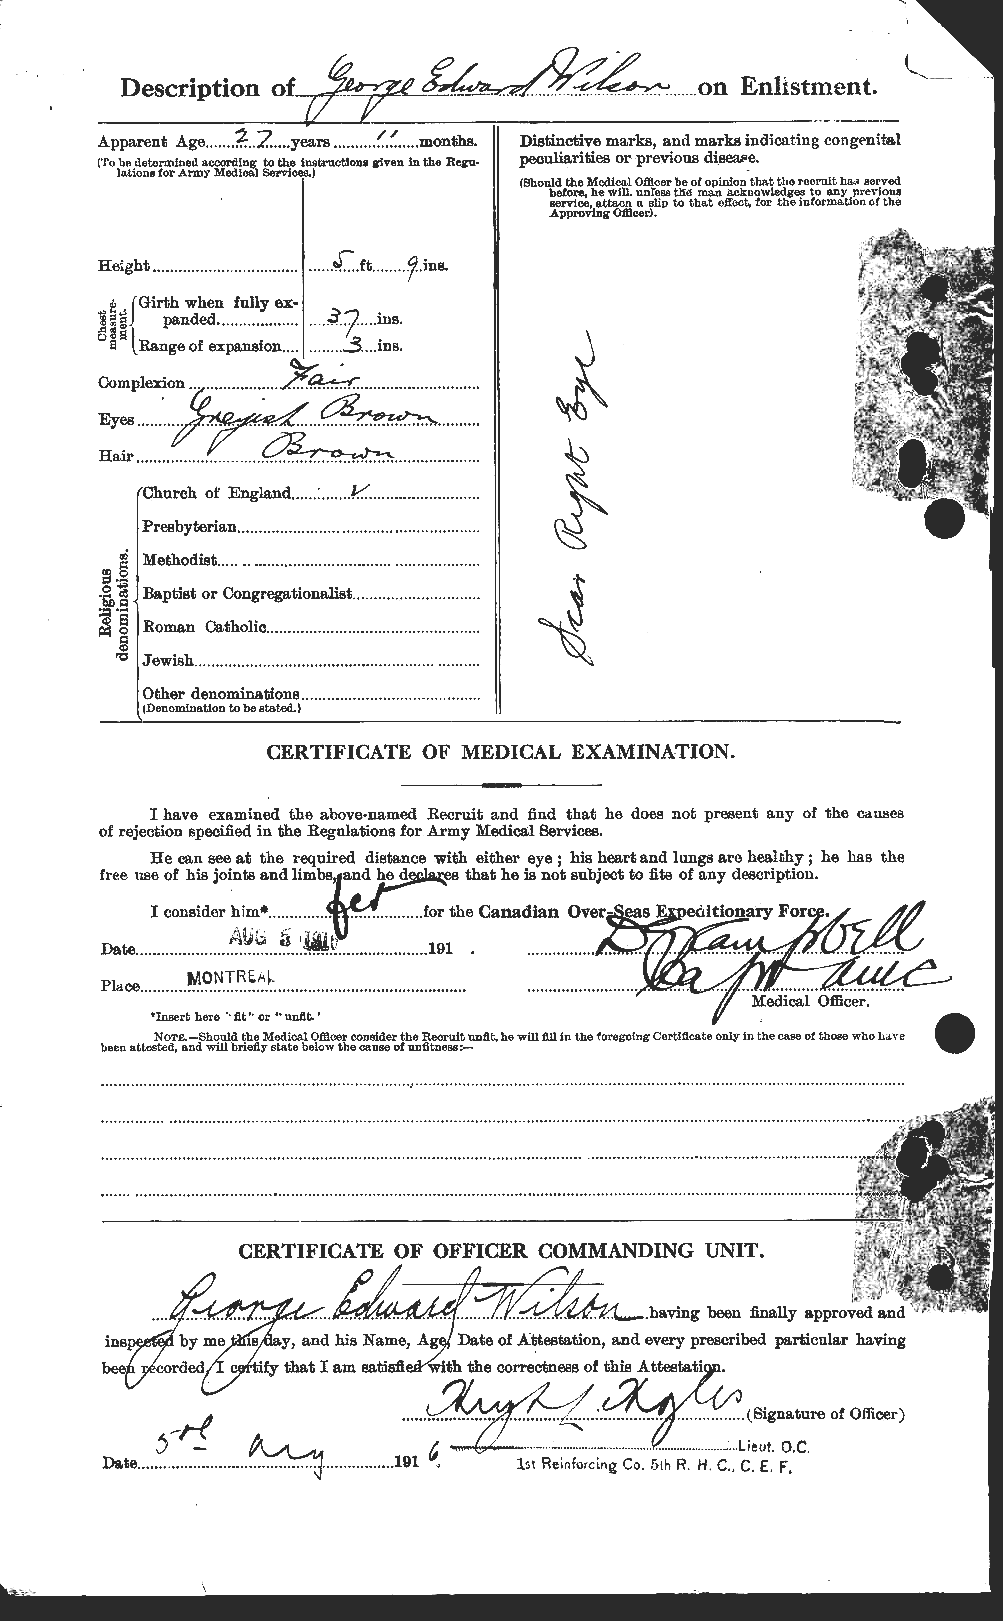 Personnel Records of the First World War - CEF 679270b